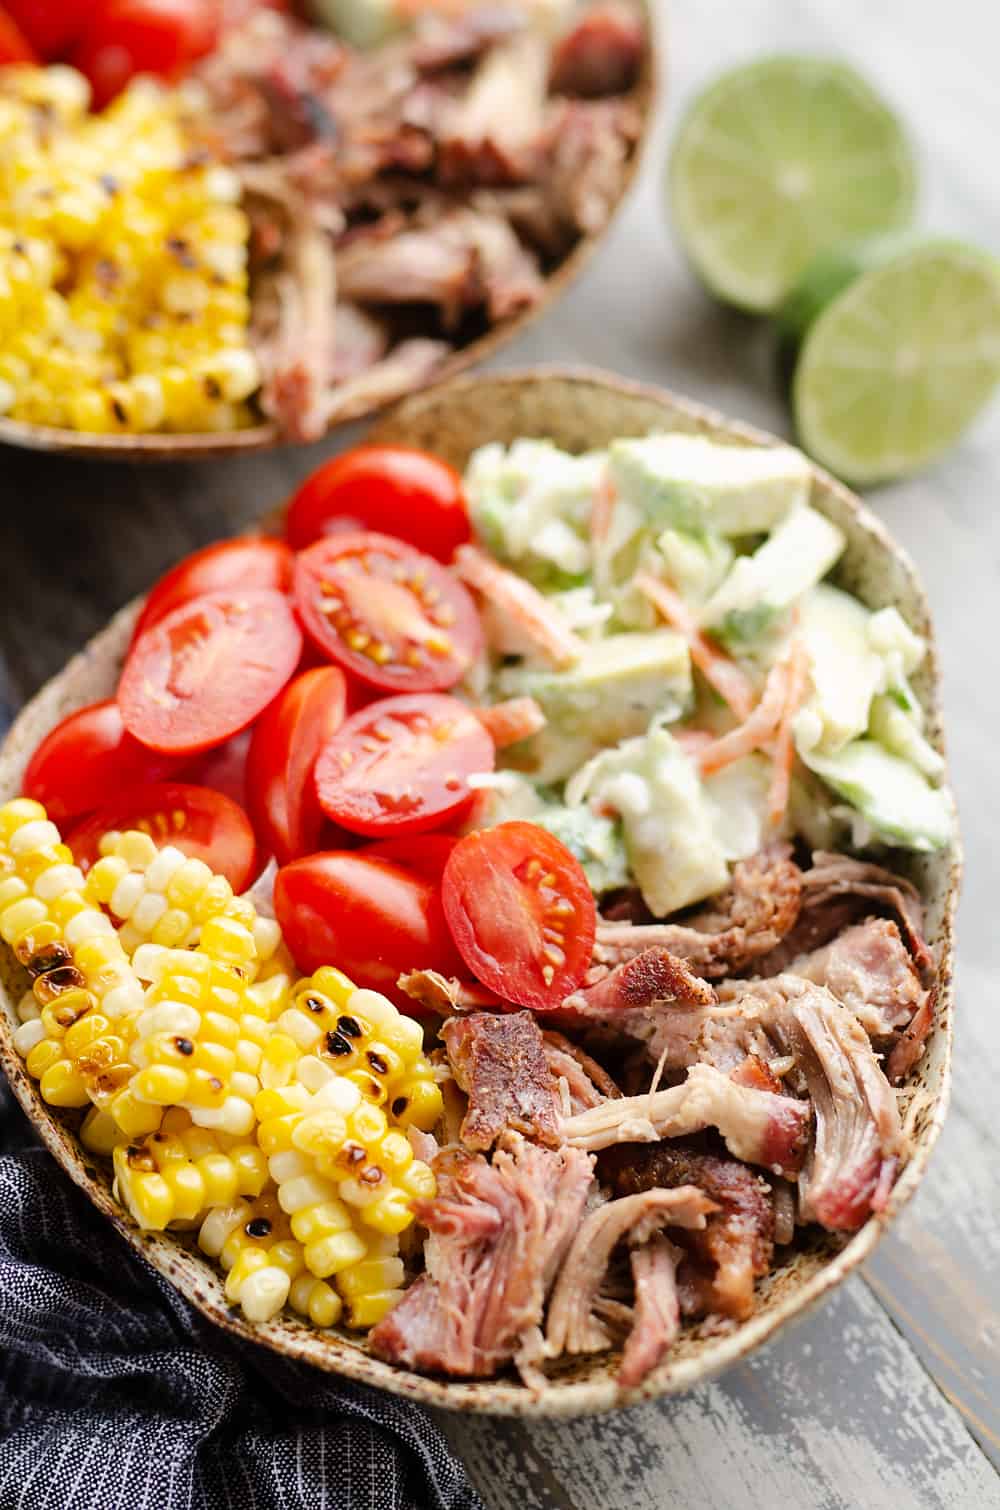 A vibrant burrito bowl on a rustic wooden surface, containing pulled pork, sliced cherry tomatoes, corn kernels, creamy coleslaw and garnished with lime wedges.